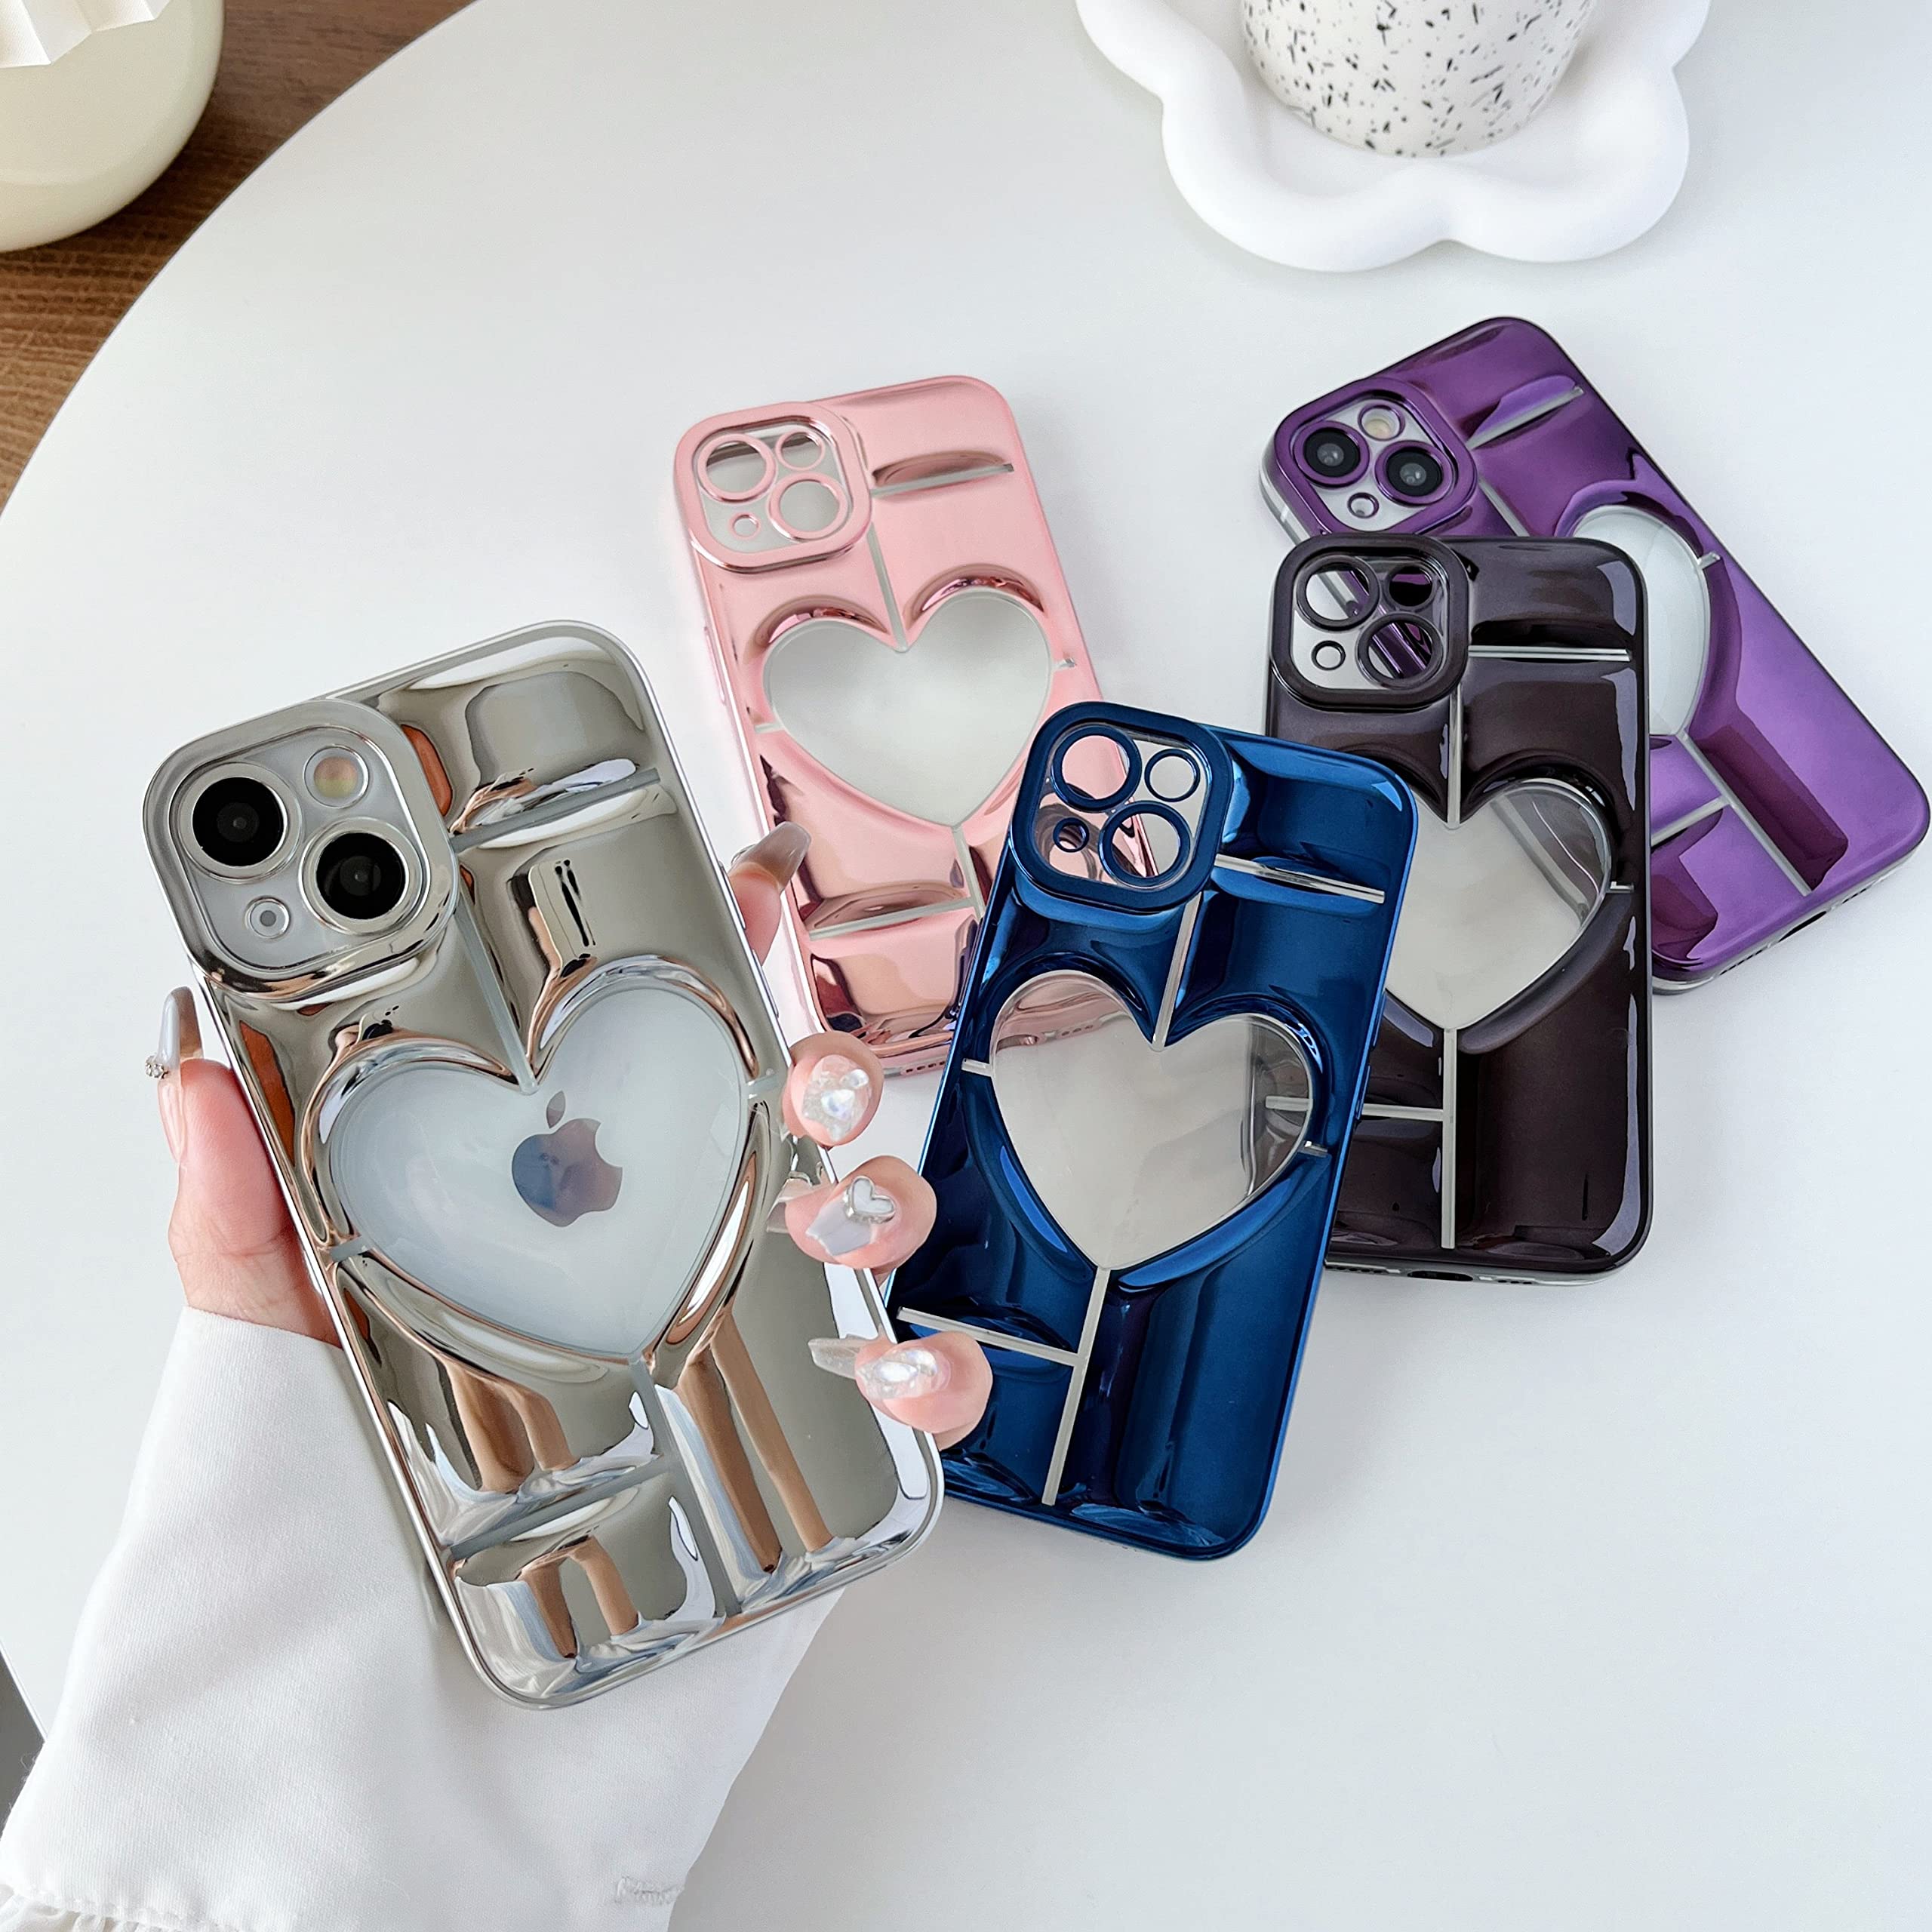 Caseative Chrome Plating Electroplated 3D Hollow Love Heart Soft Compatible with iPhone Case (Blue,iPhone 13)